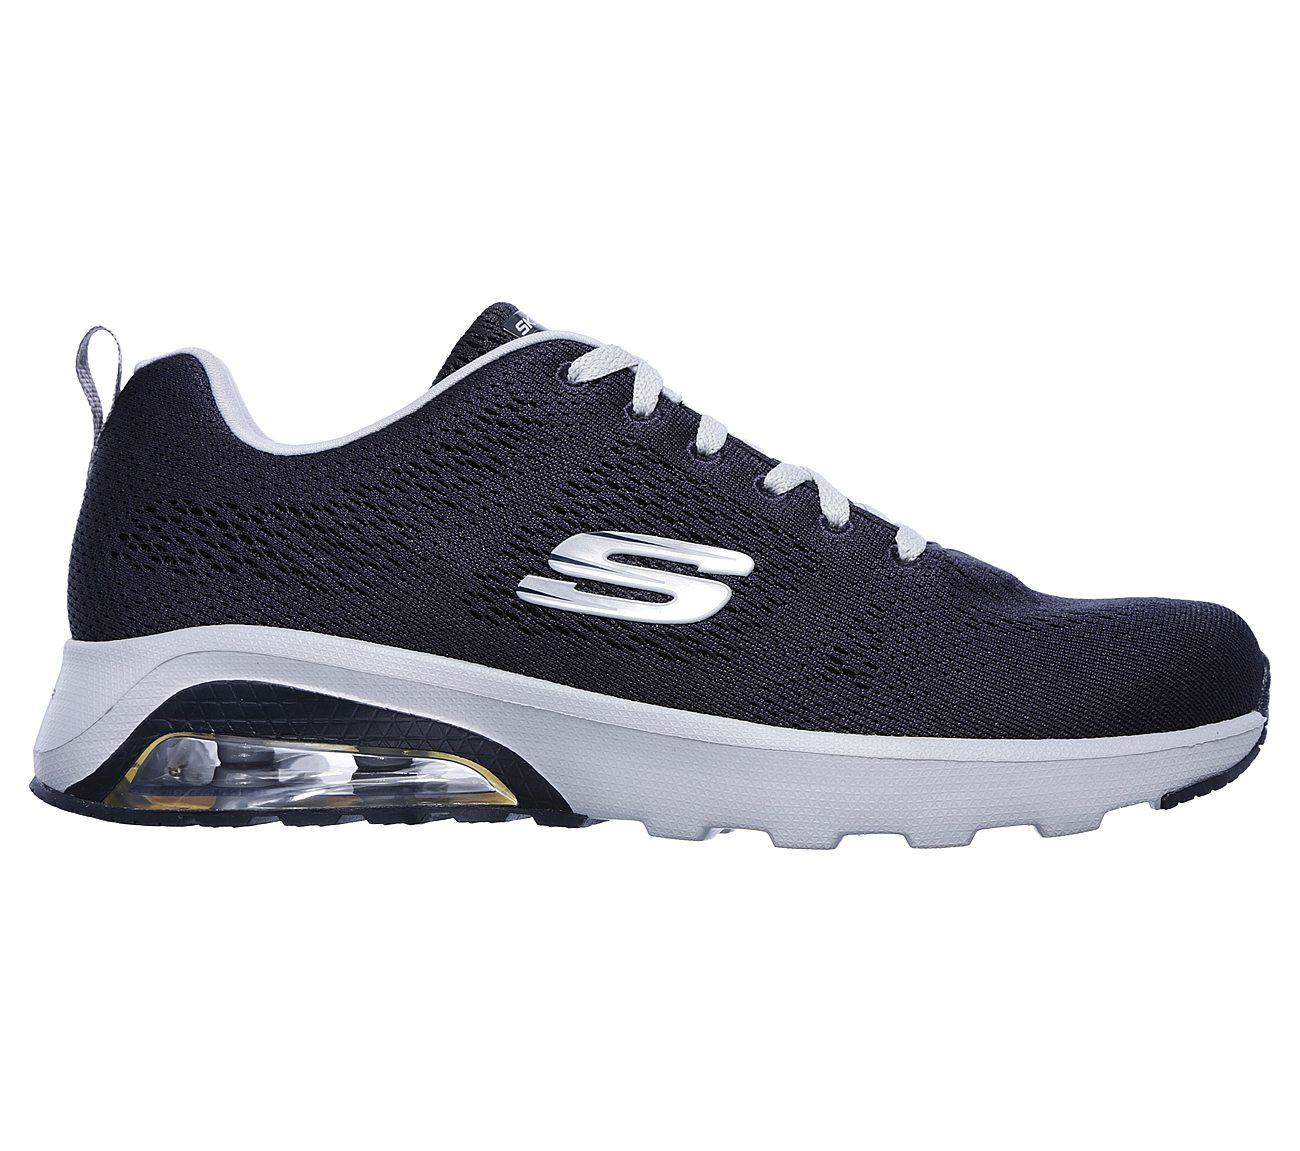 Buy SKECHERS Skech-Air Extreme - Natson Skech-Air Shoes